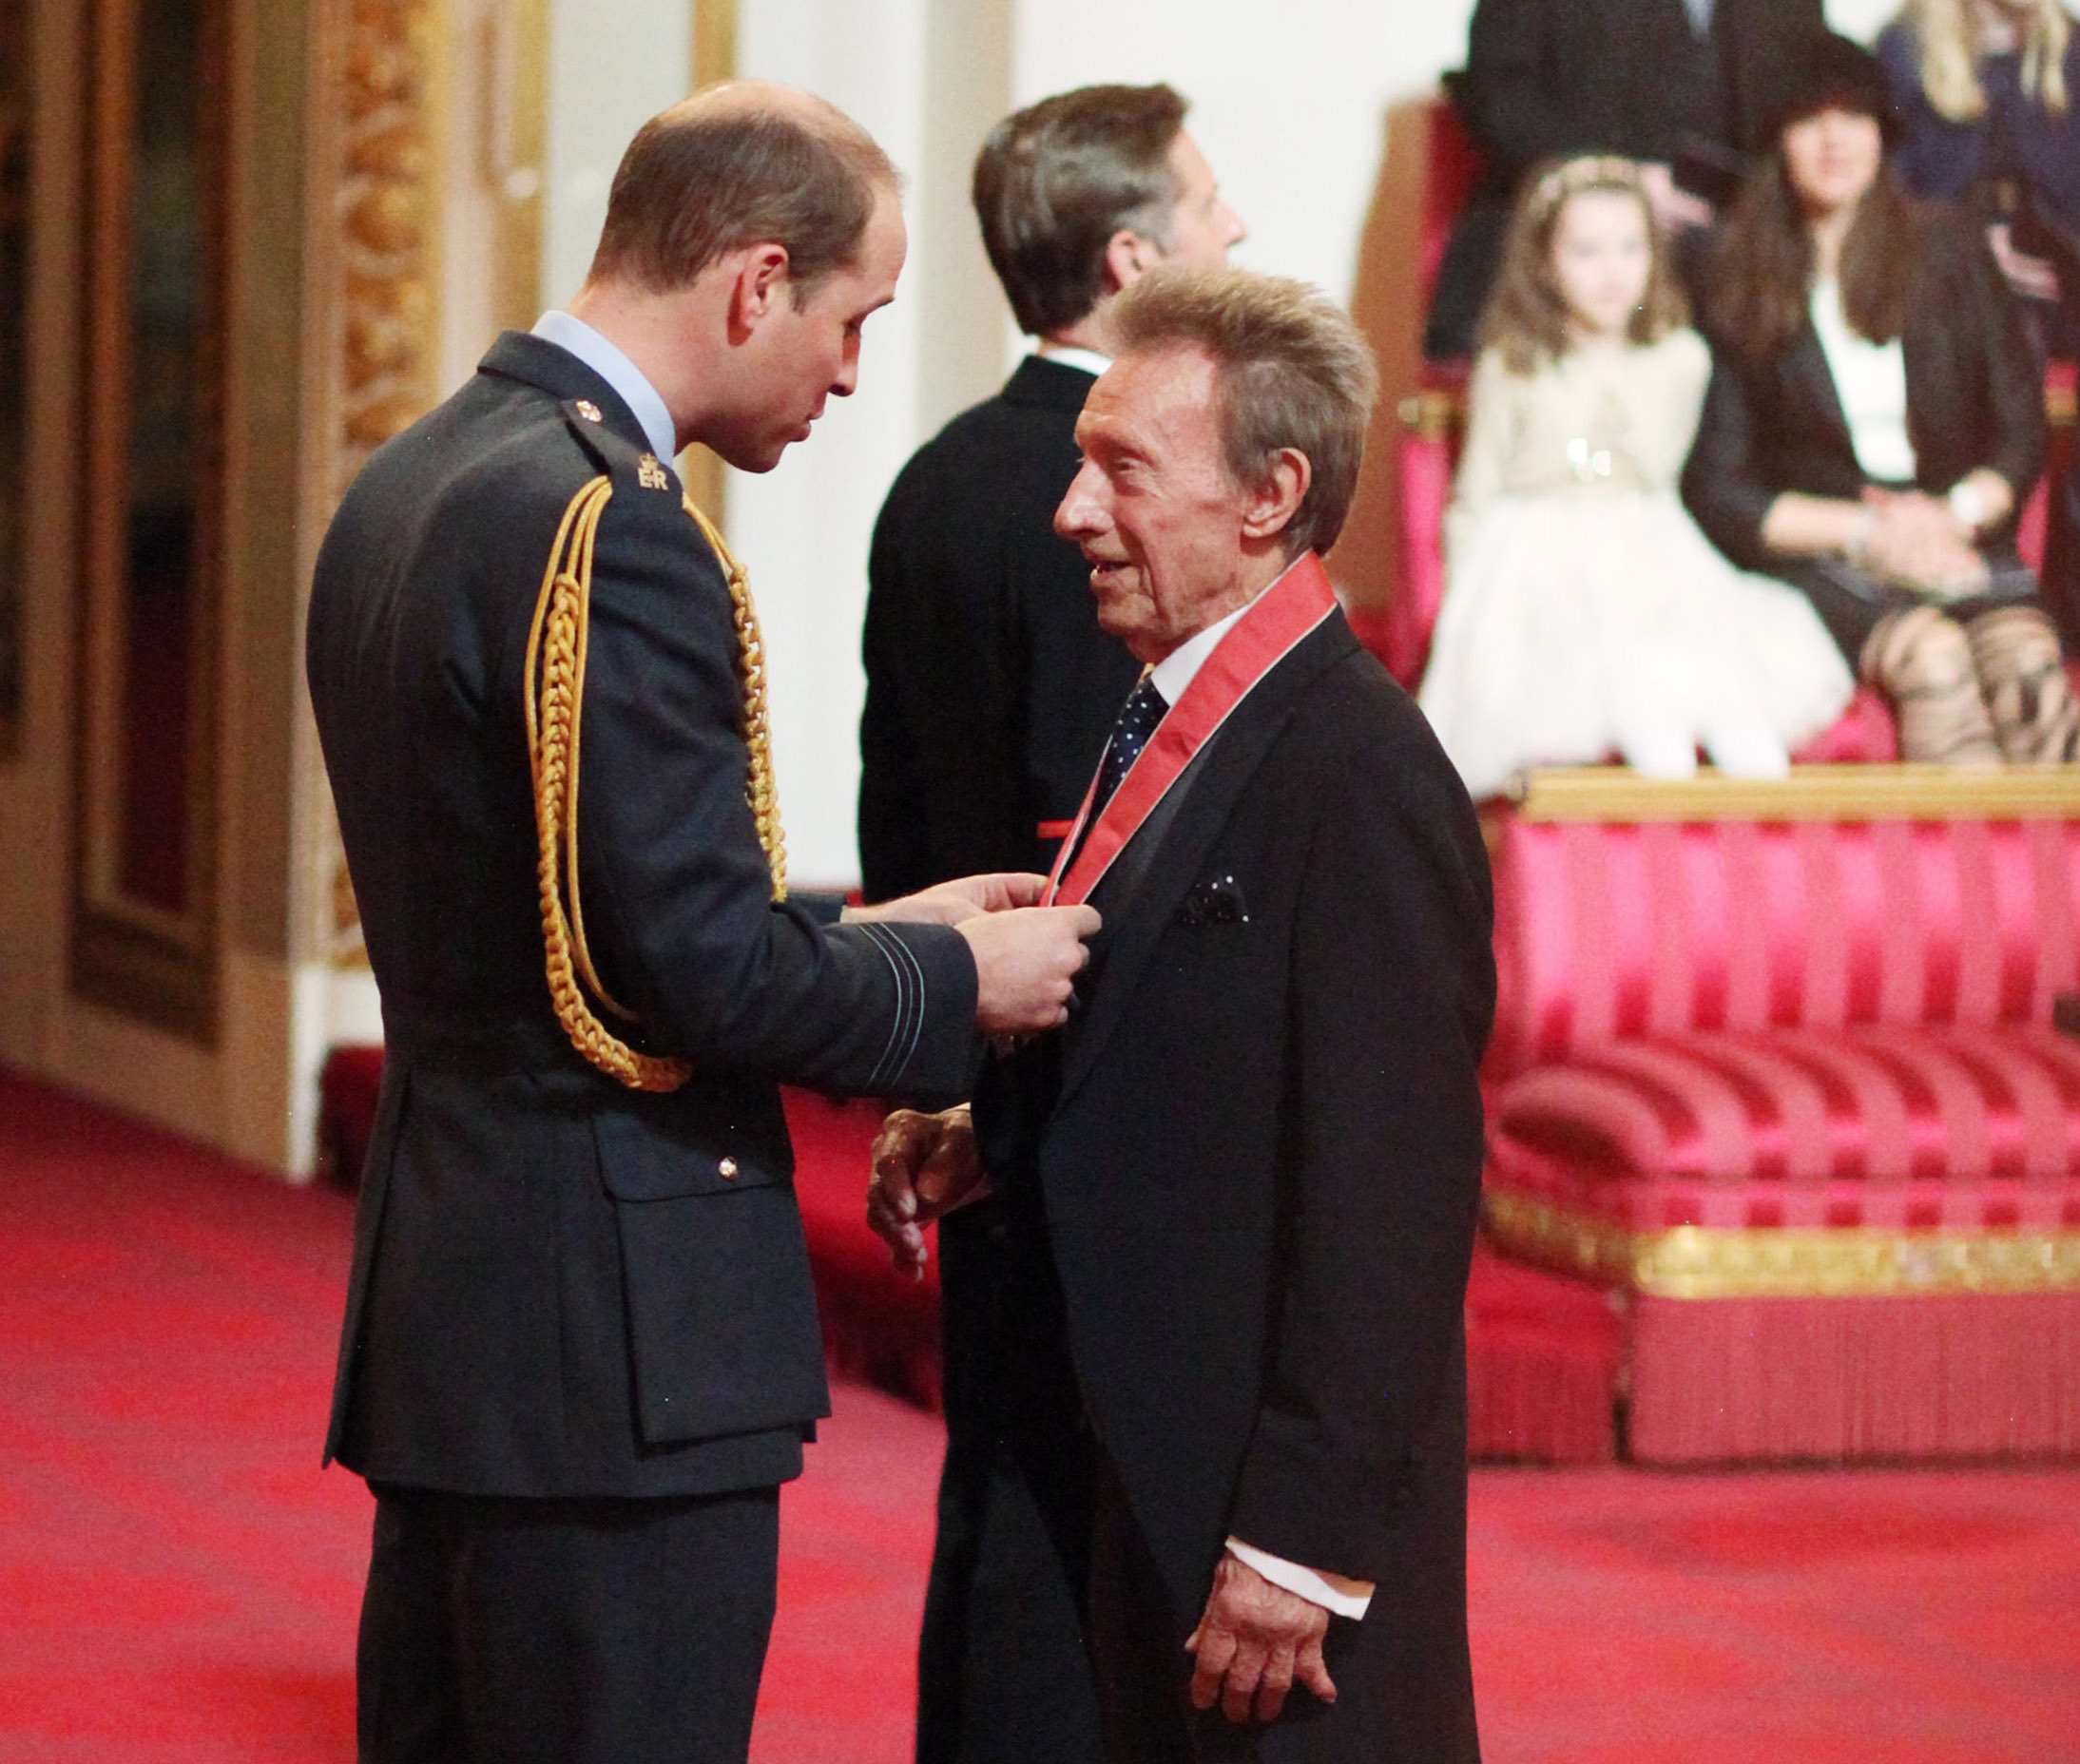 Former Scotland and Manchester United football great Denis Law is made a Commander of the Order of the British Empire (CBE) by the Duke of Cambridge at an Investiture ceremony in Buckingham Palace, London. PRESS ASSOCIATION Photo. Picture date: Friday March 11, 2016. Photo credit should read: Yui Mok/PA Wire